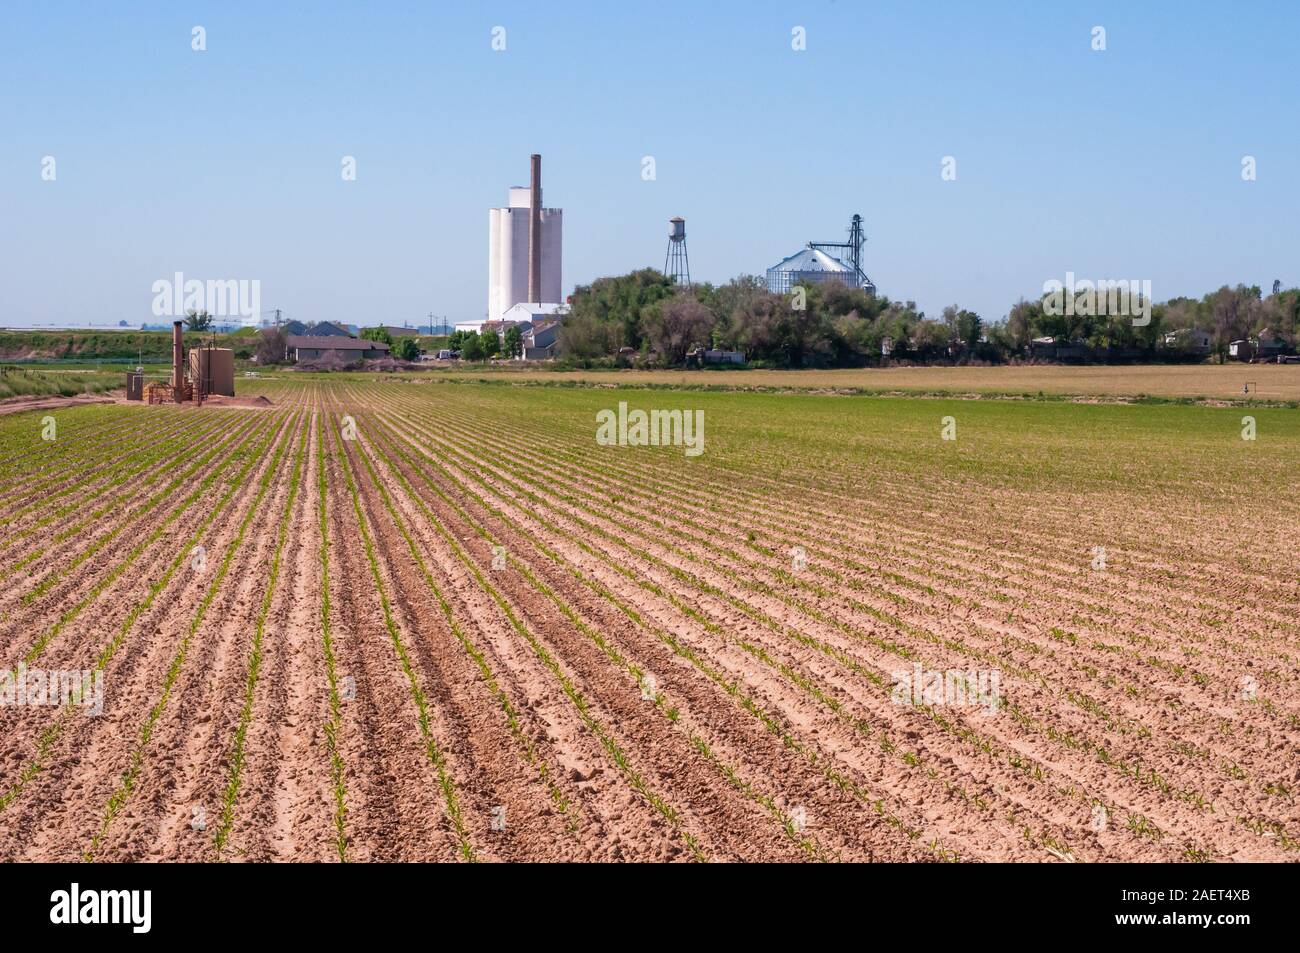 Fresh seedlings of corn growing in long rows on a farm in rural Colorado, USA Stock Photo